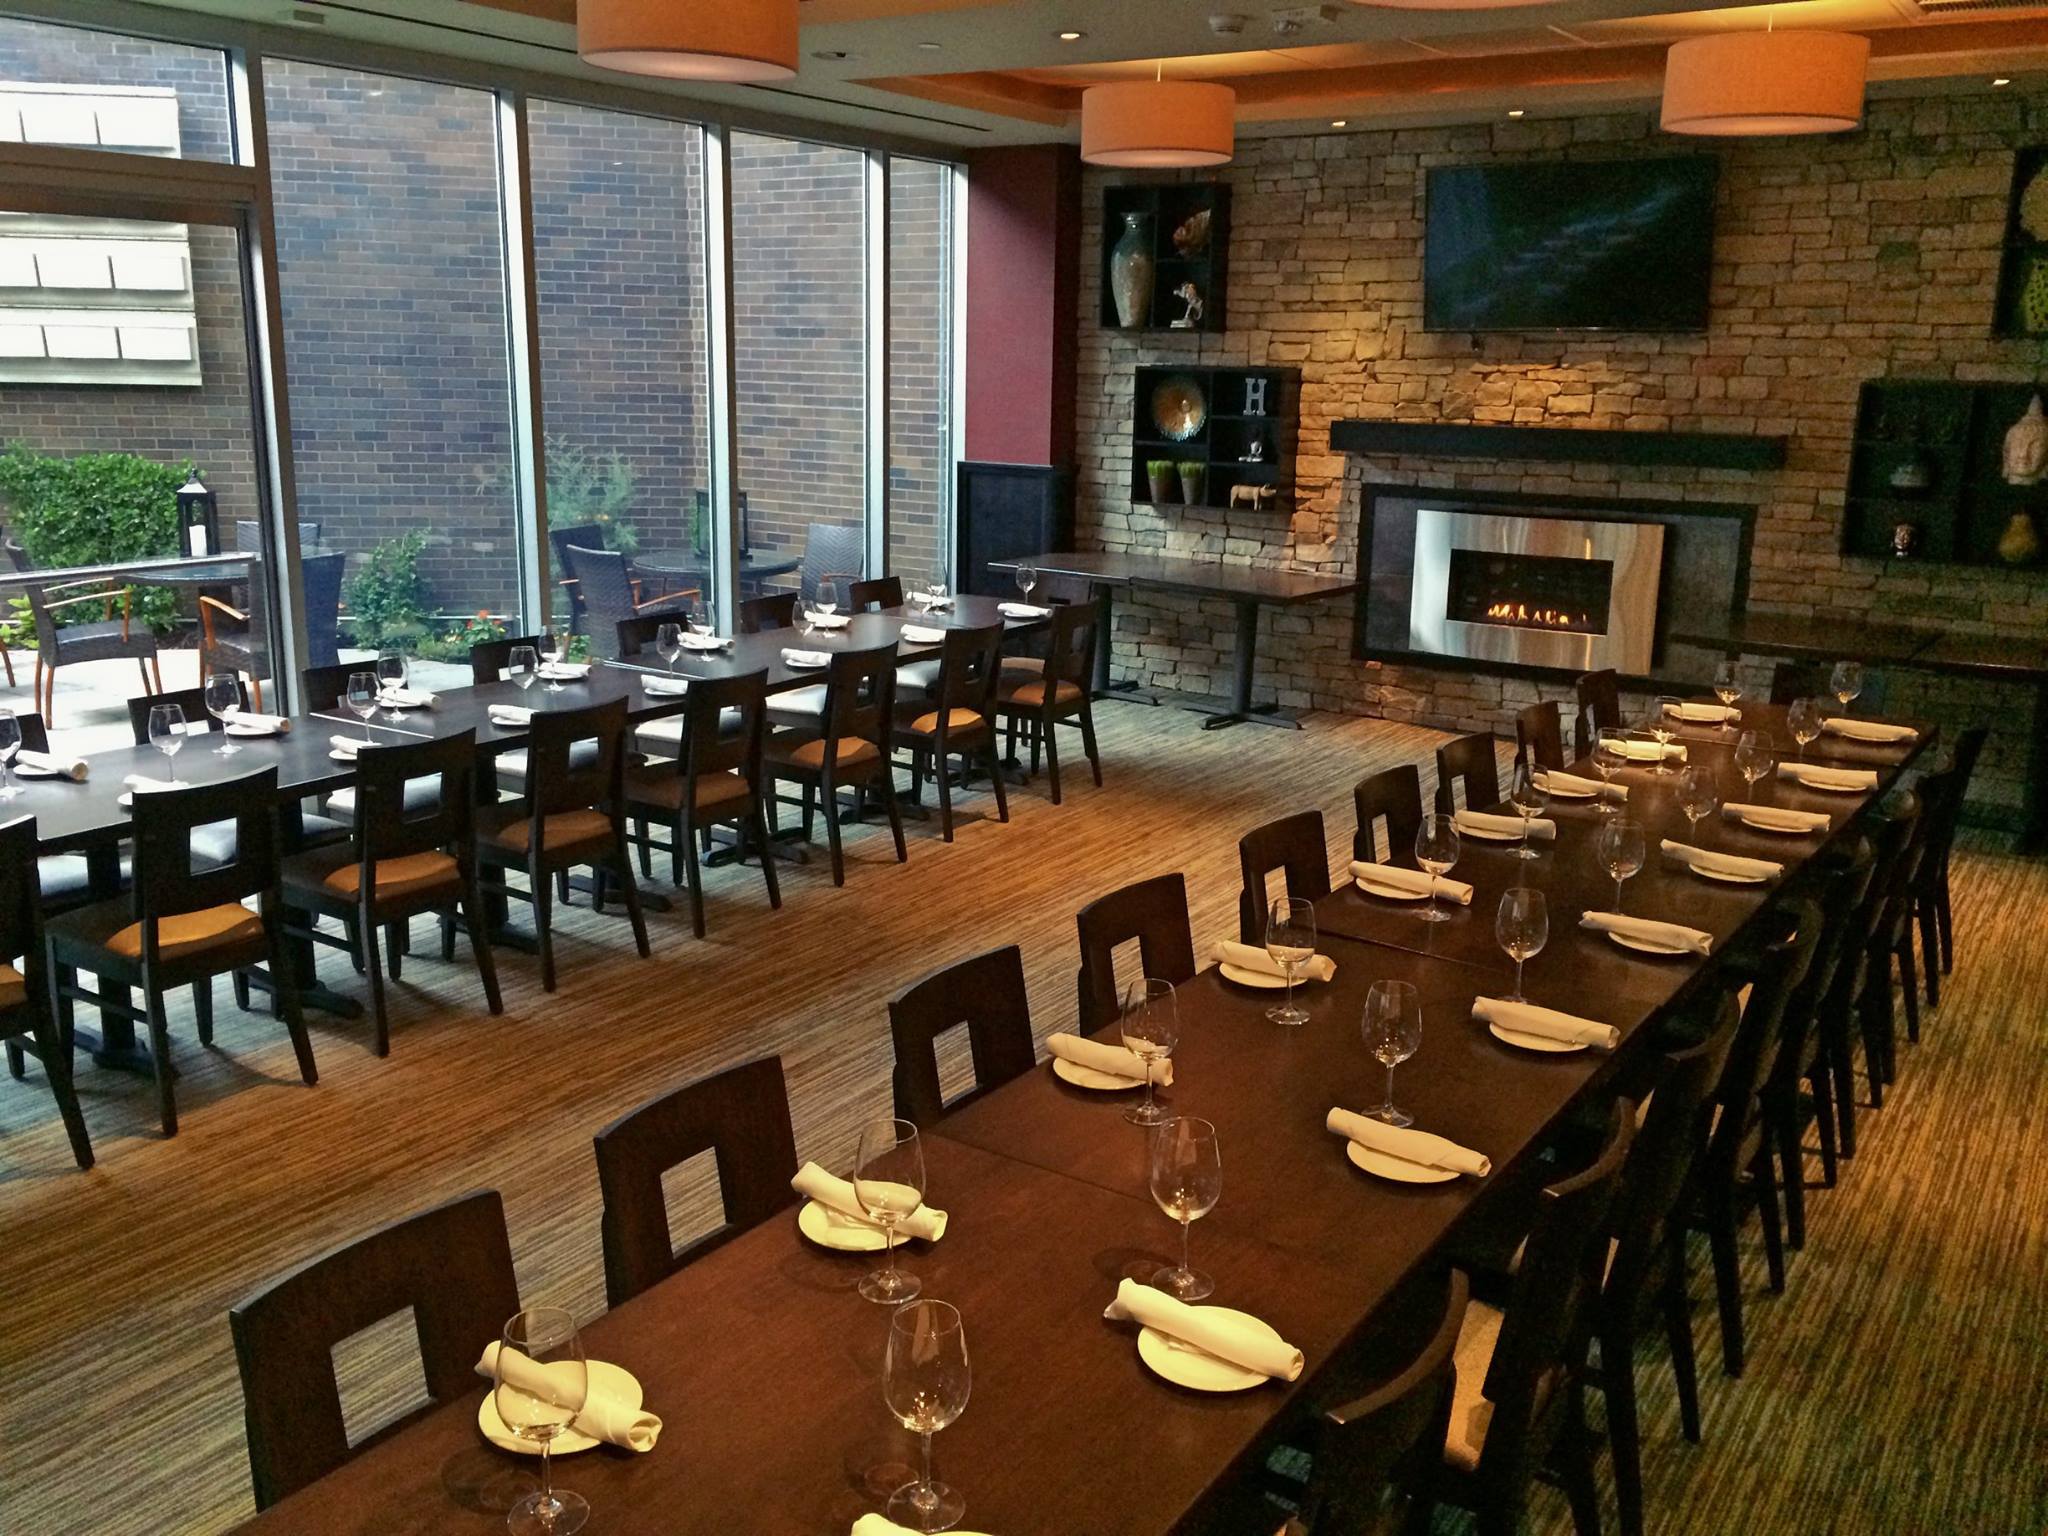 The AV-equipped private dining room for corporate and family gatherings.